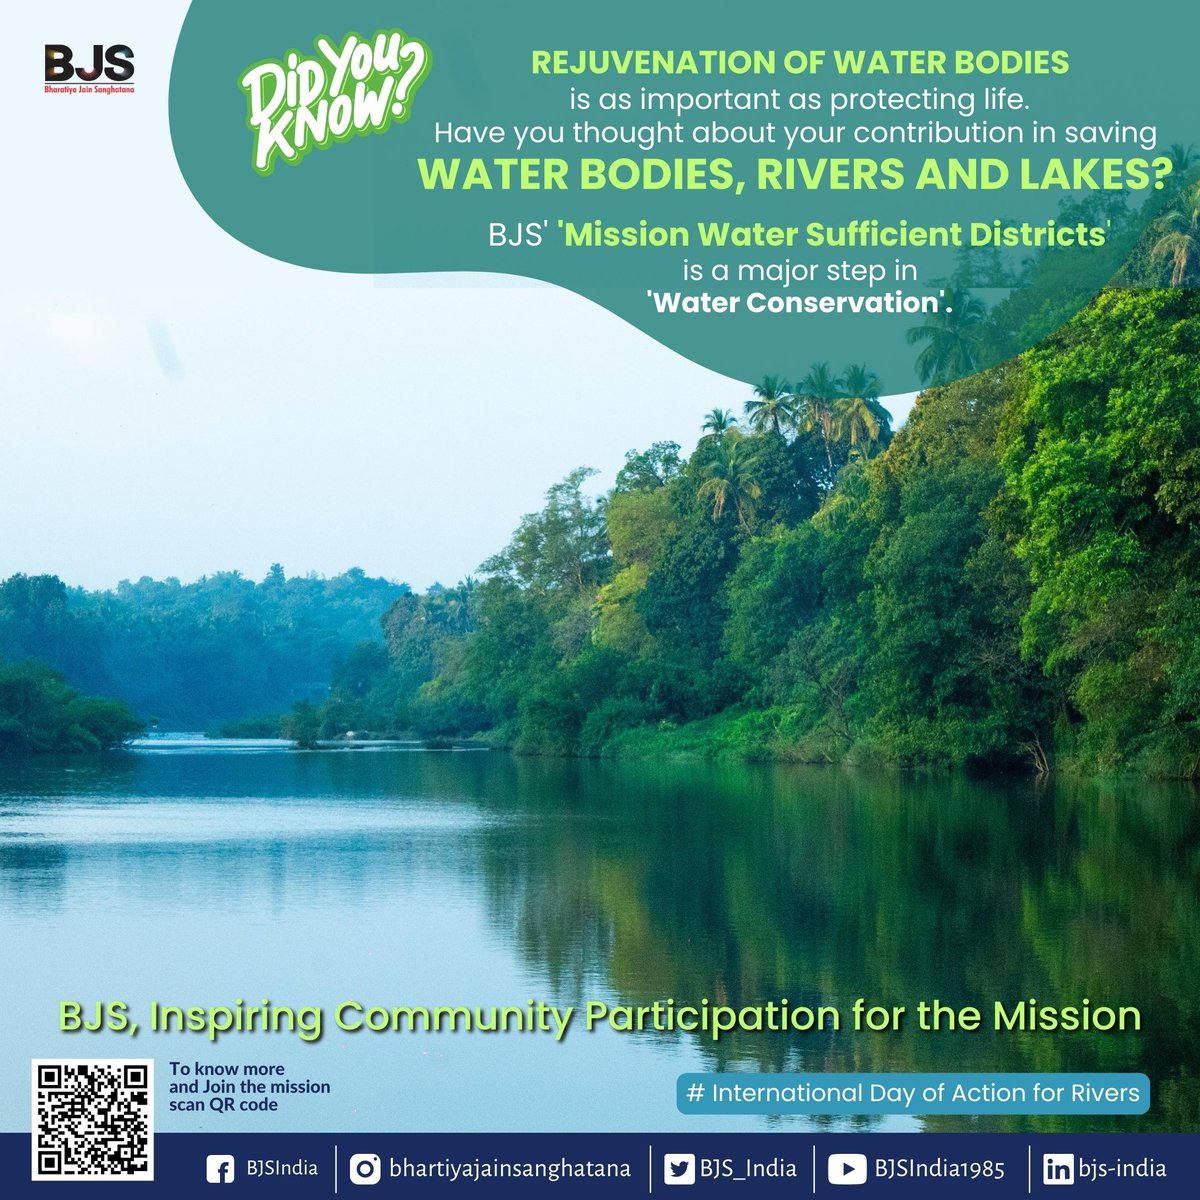 Let’s save the rivers. 
Let's commit ourselves to “Water Conservation'

International Day of Action for Rivers.

#Rivers #rightsofrivers #InternationalDayOfActionForRivers
#InternationalRiversDay2023 #NGO #NGOIndia #BJS #BharatiyaJainSanghatana